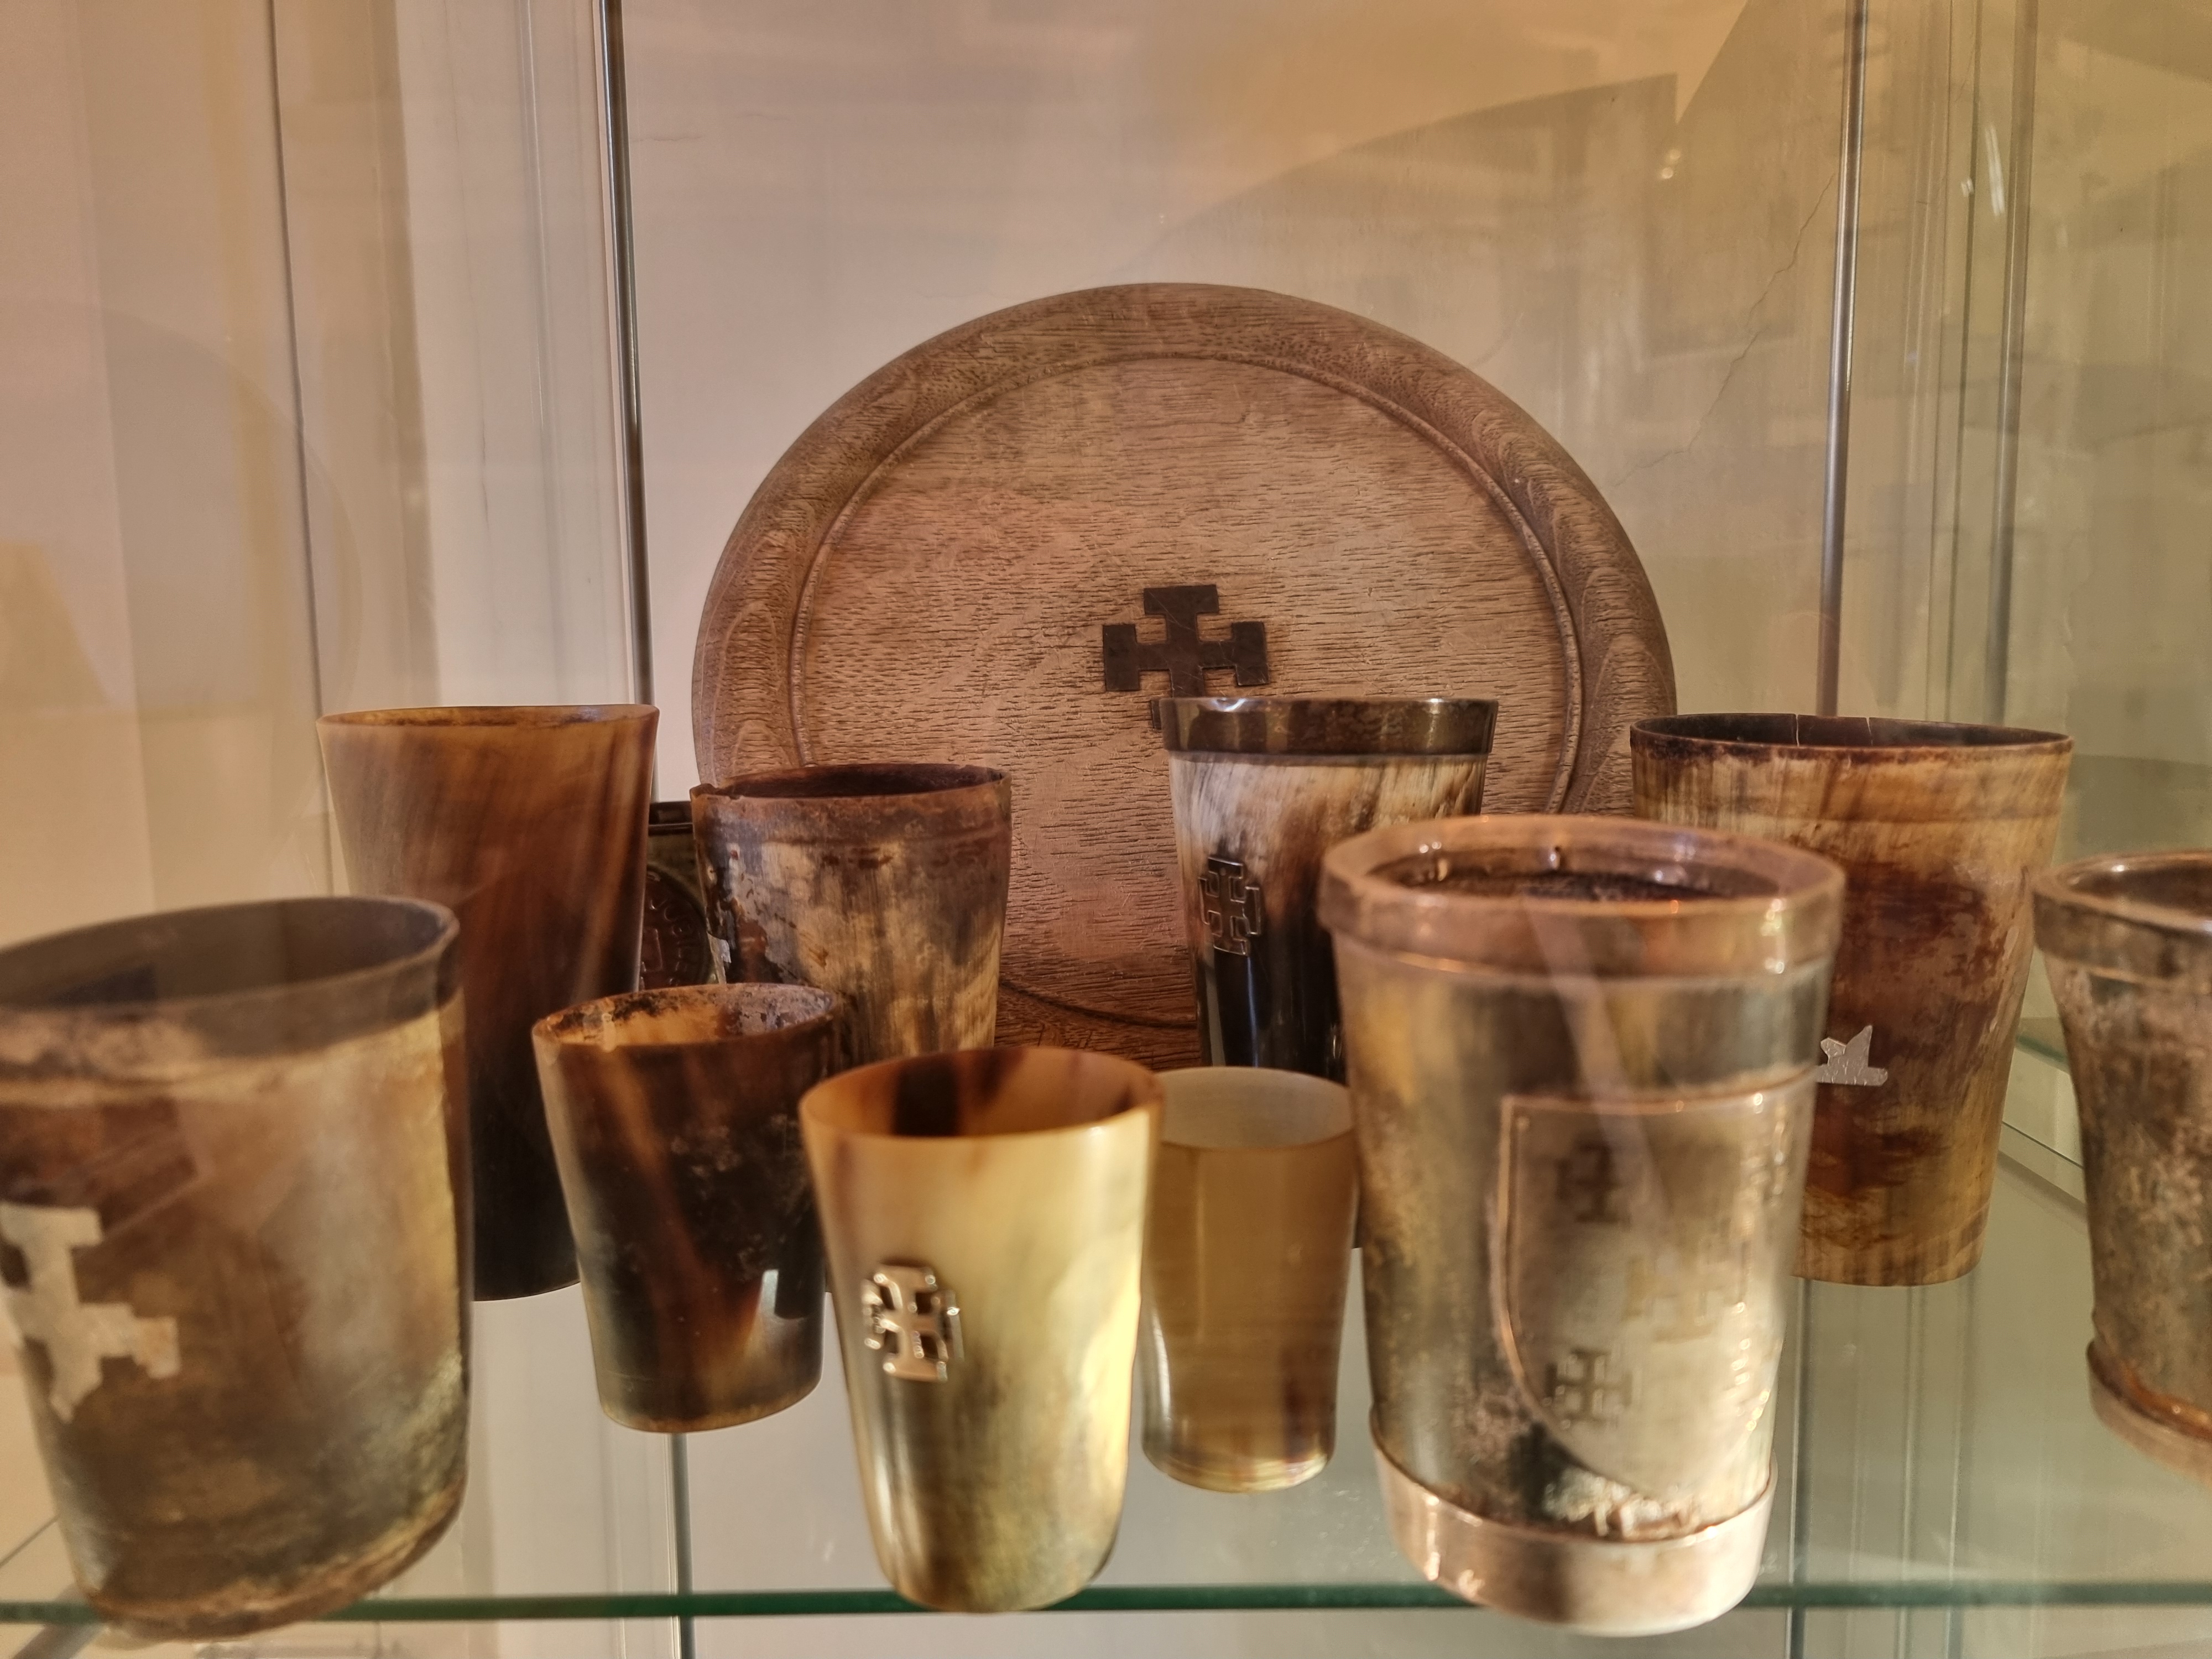 Small plate and several horn beaker style cups on a glass shelf.